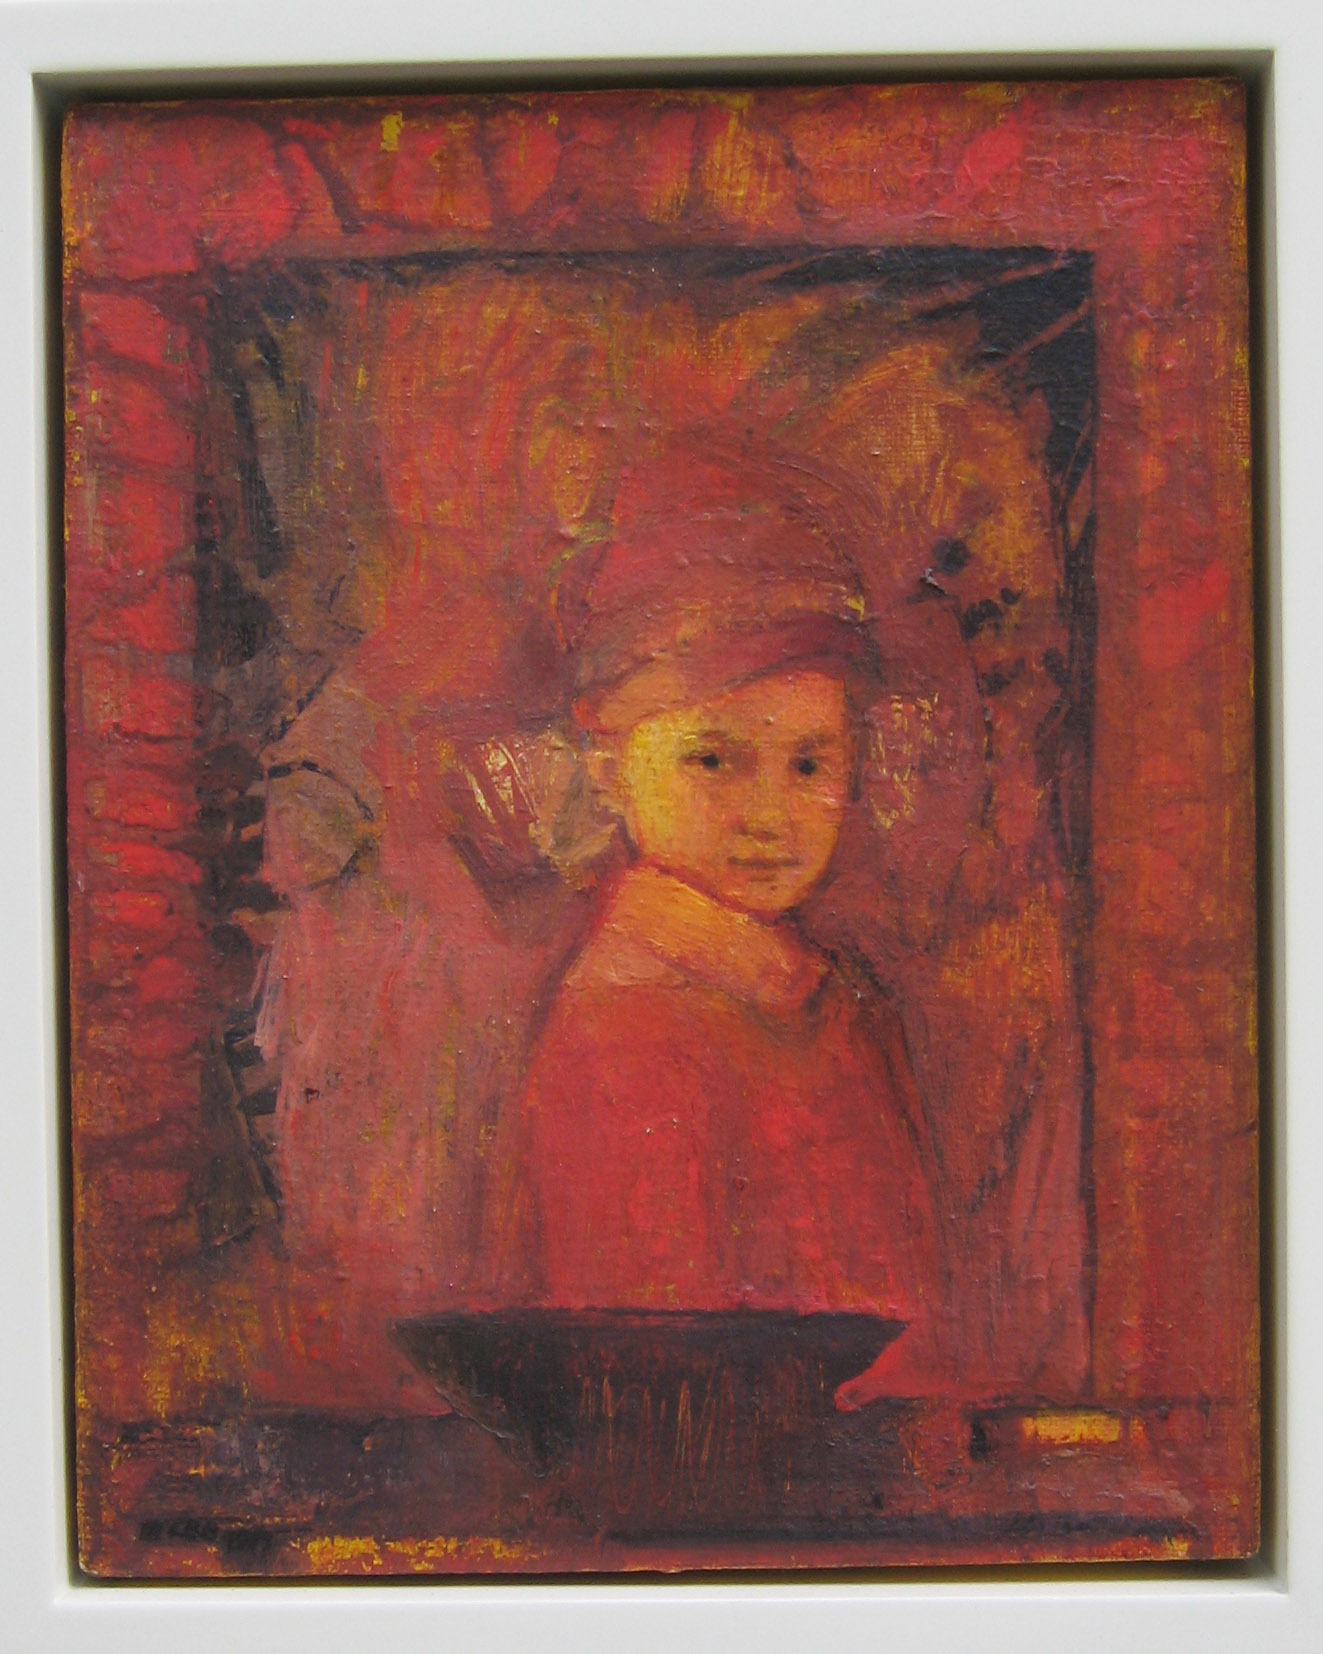 5be(0) - The Looking Glass, iul on canvas, wood, 17x15 in. 2001.jpg